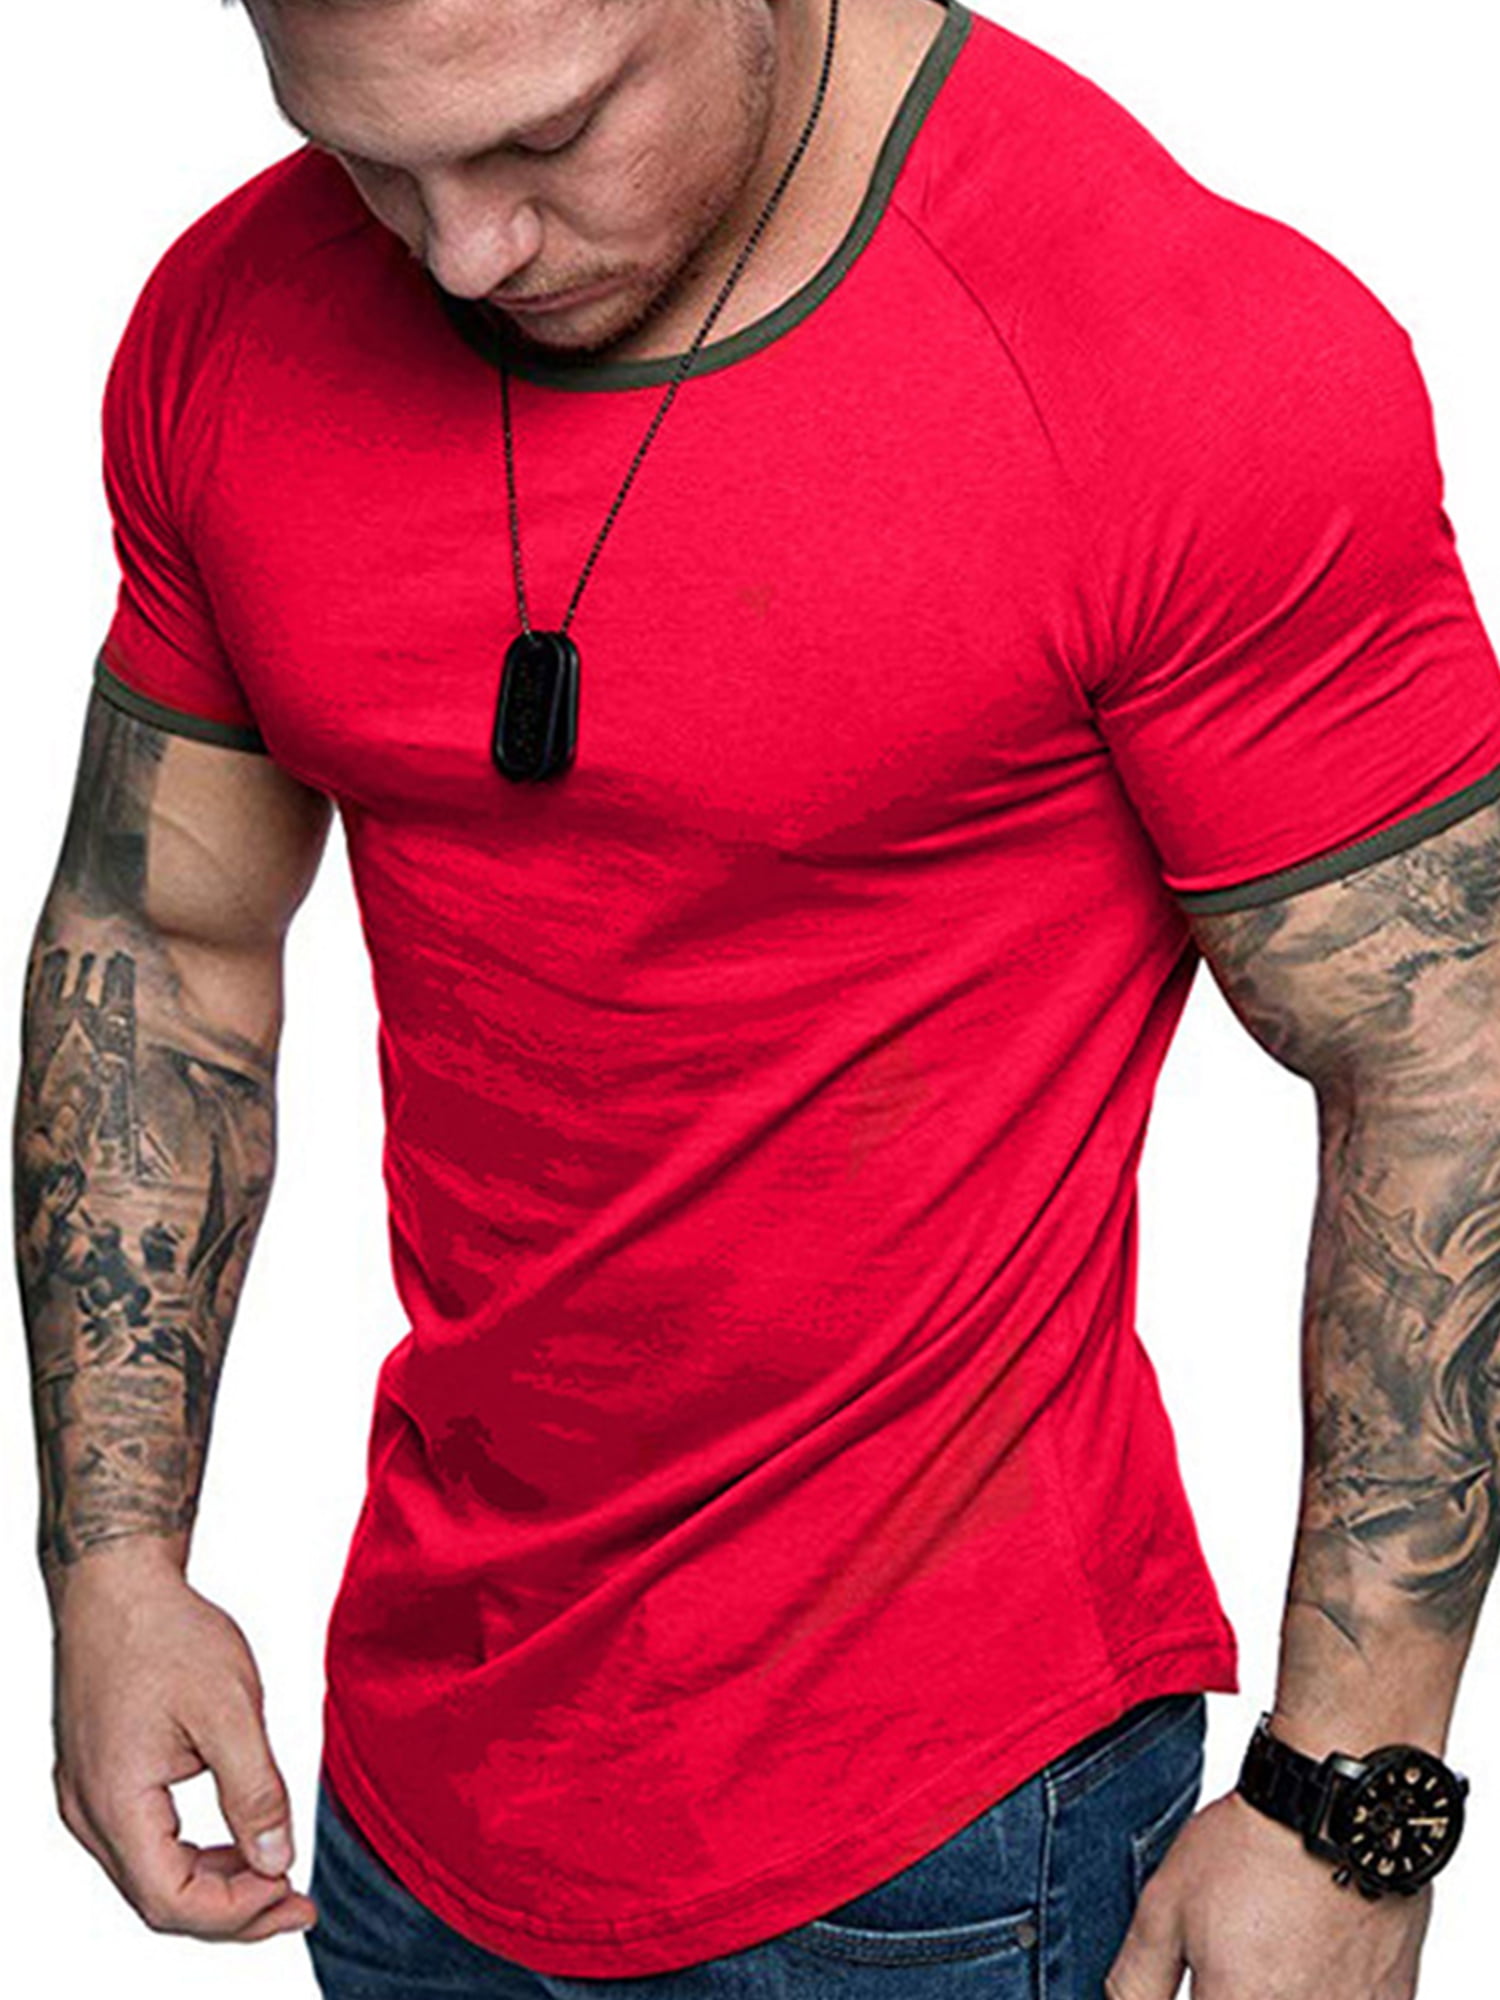 Lallc - Mens Slim Fit Short Sleeve T Shirt Muscle Tee Casual Tops